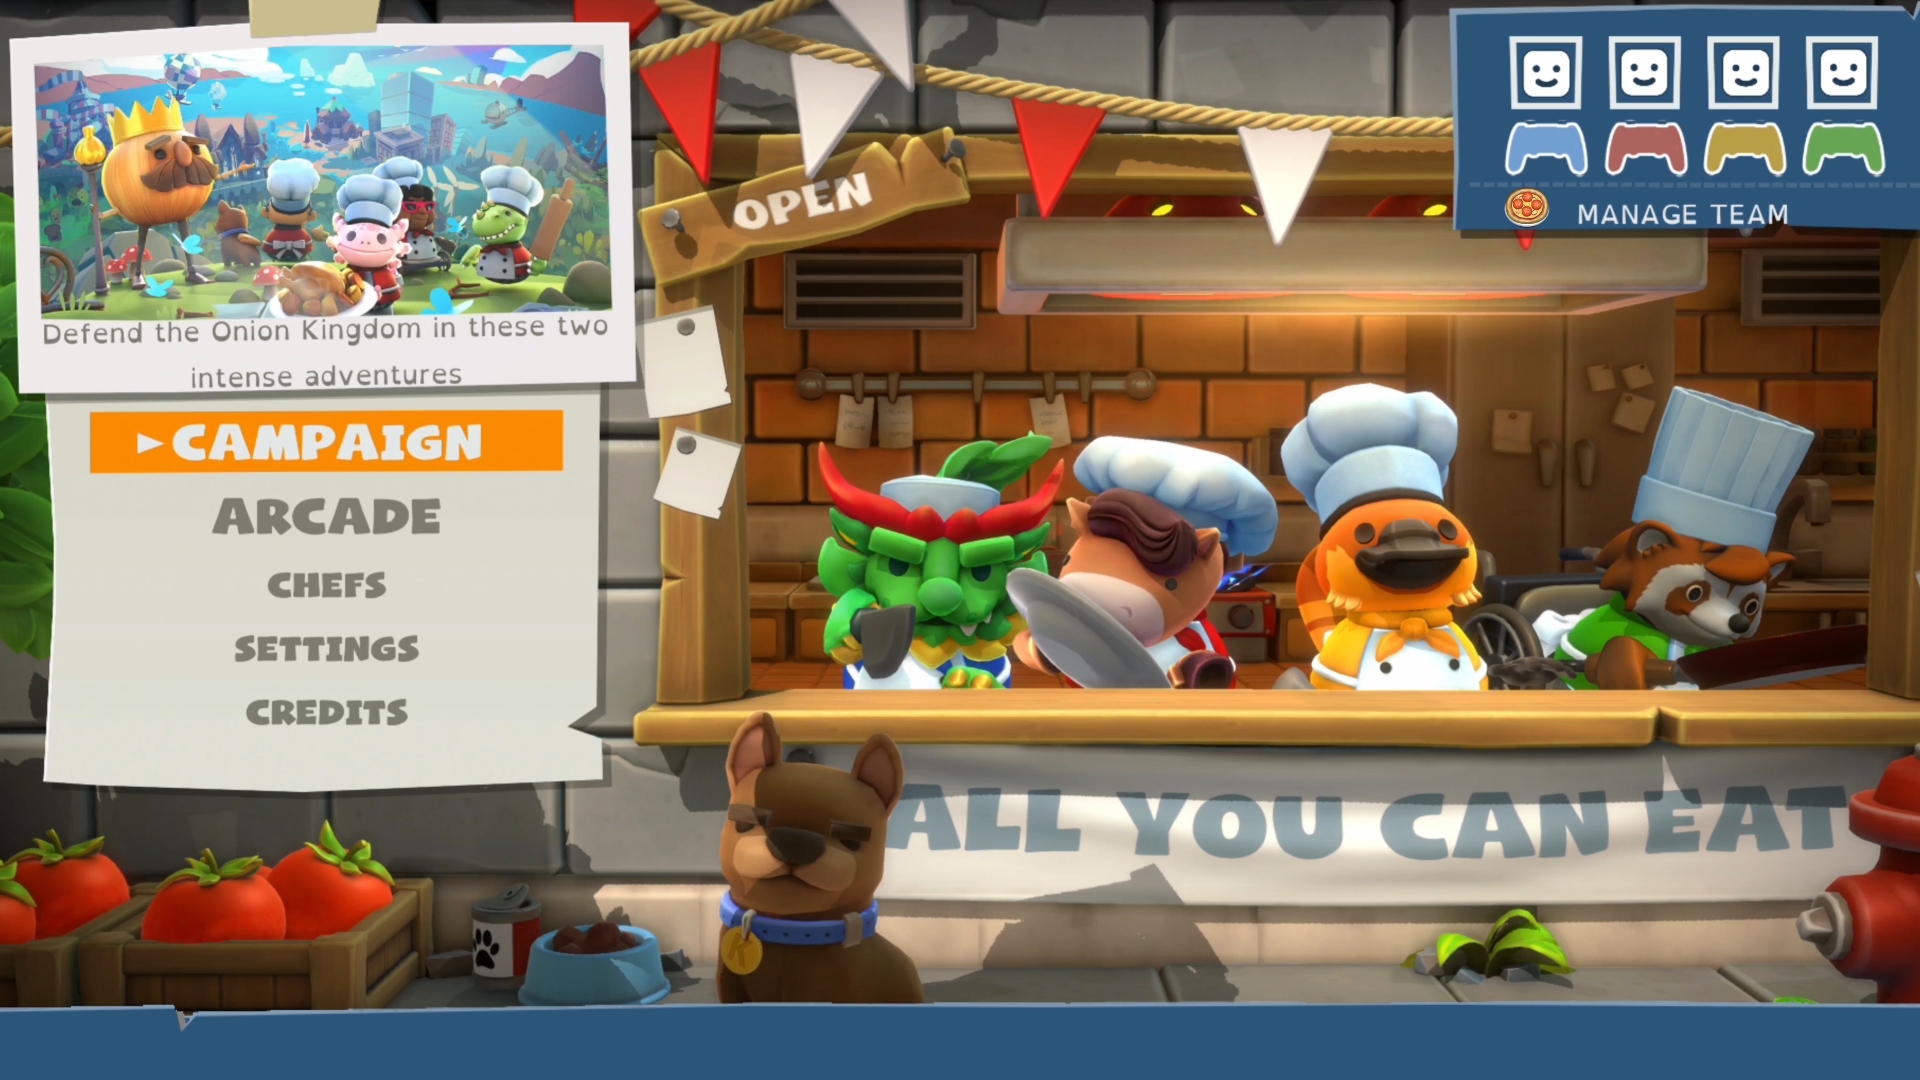 Overcooked! All You Can Eat Arriving on Switch, PS4, Xbox One, and